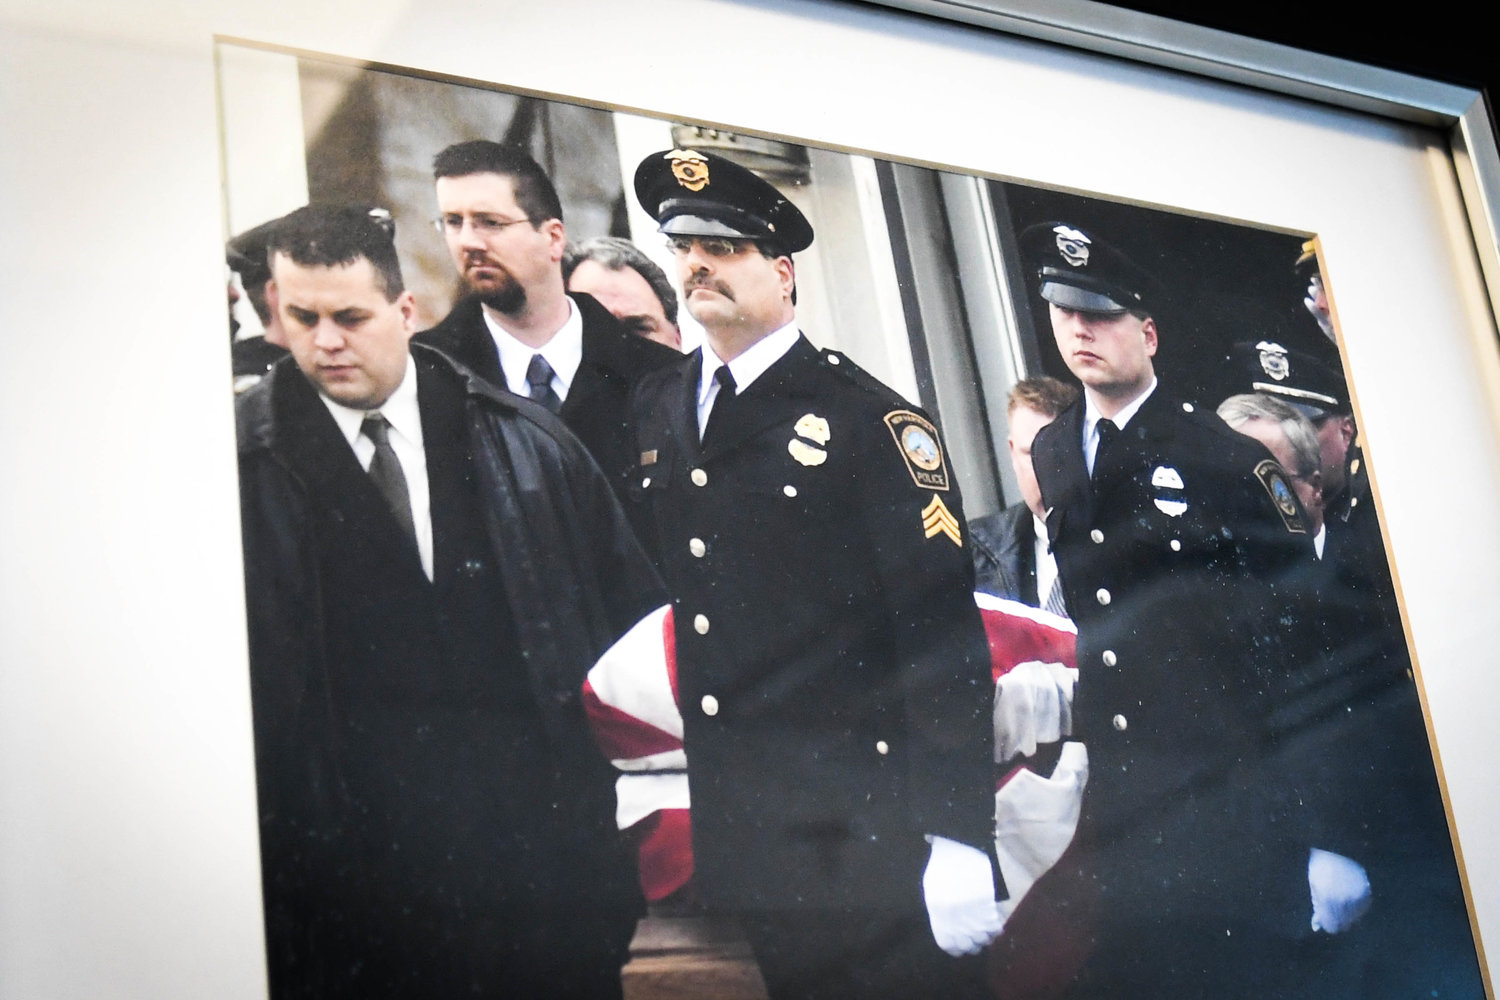 A framed photo of Police Chief Michael Inserra and others carrying the casket of Officer Joseph Corr in 2006. Corr was killed in the line of duty during a vehicle pursuit following a jewelry store robbery. Inserra was heavily involved in the ensuing investigation.